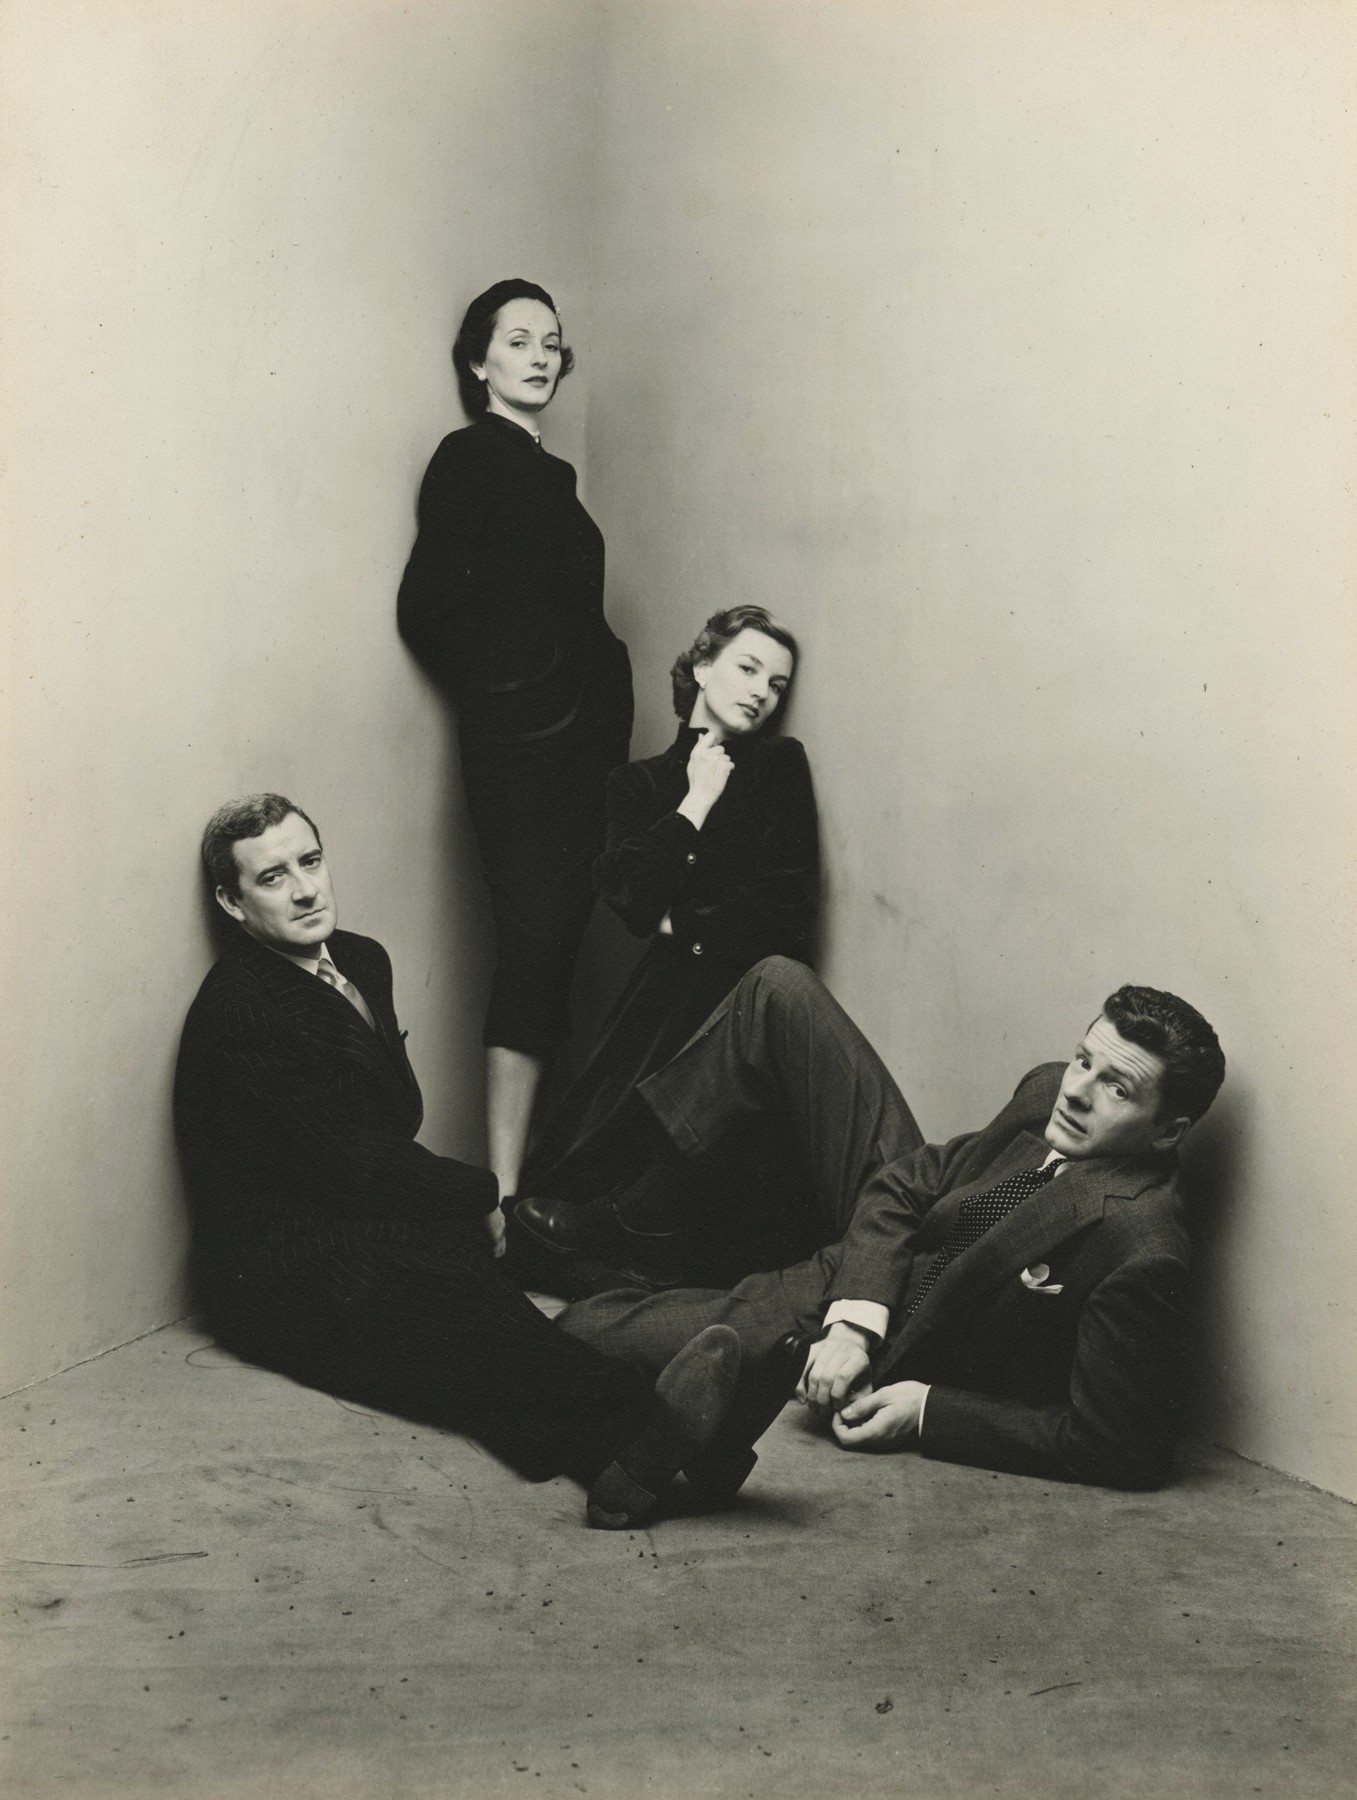 Irving Penn  James Downey, Betty McLaughlin, Laurie "Dougie" Douglass and Bill Harbach, c.1948  Gelatin silver print; printed c.1948  9 1/8 x 6 7/8 inches